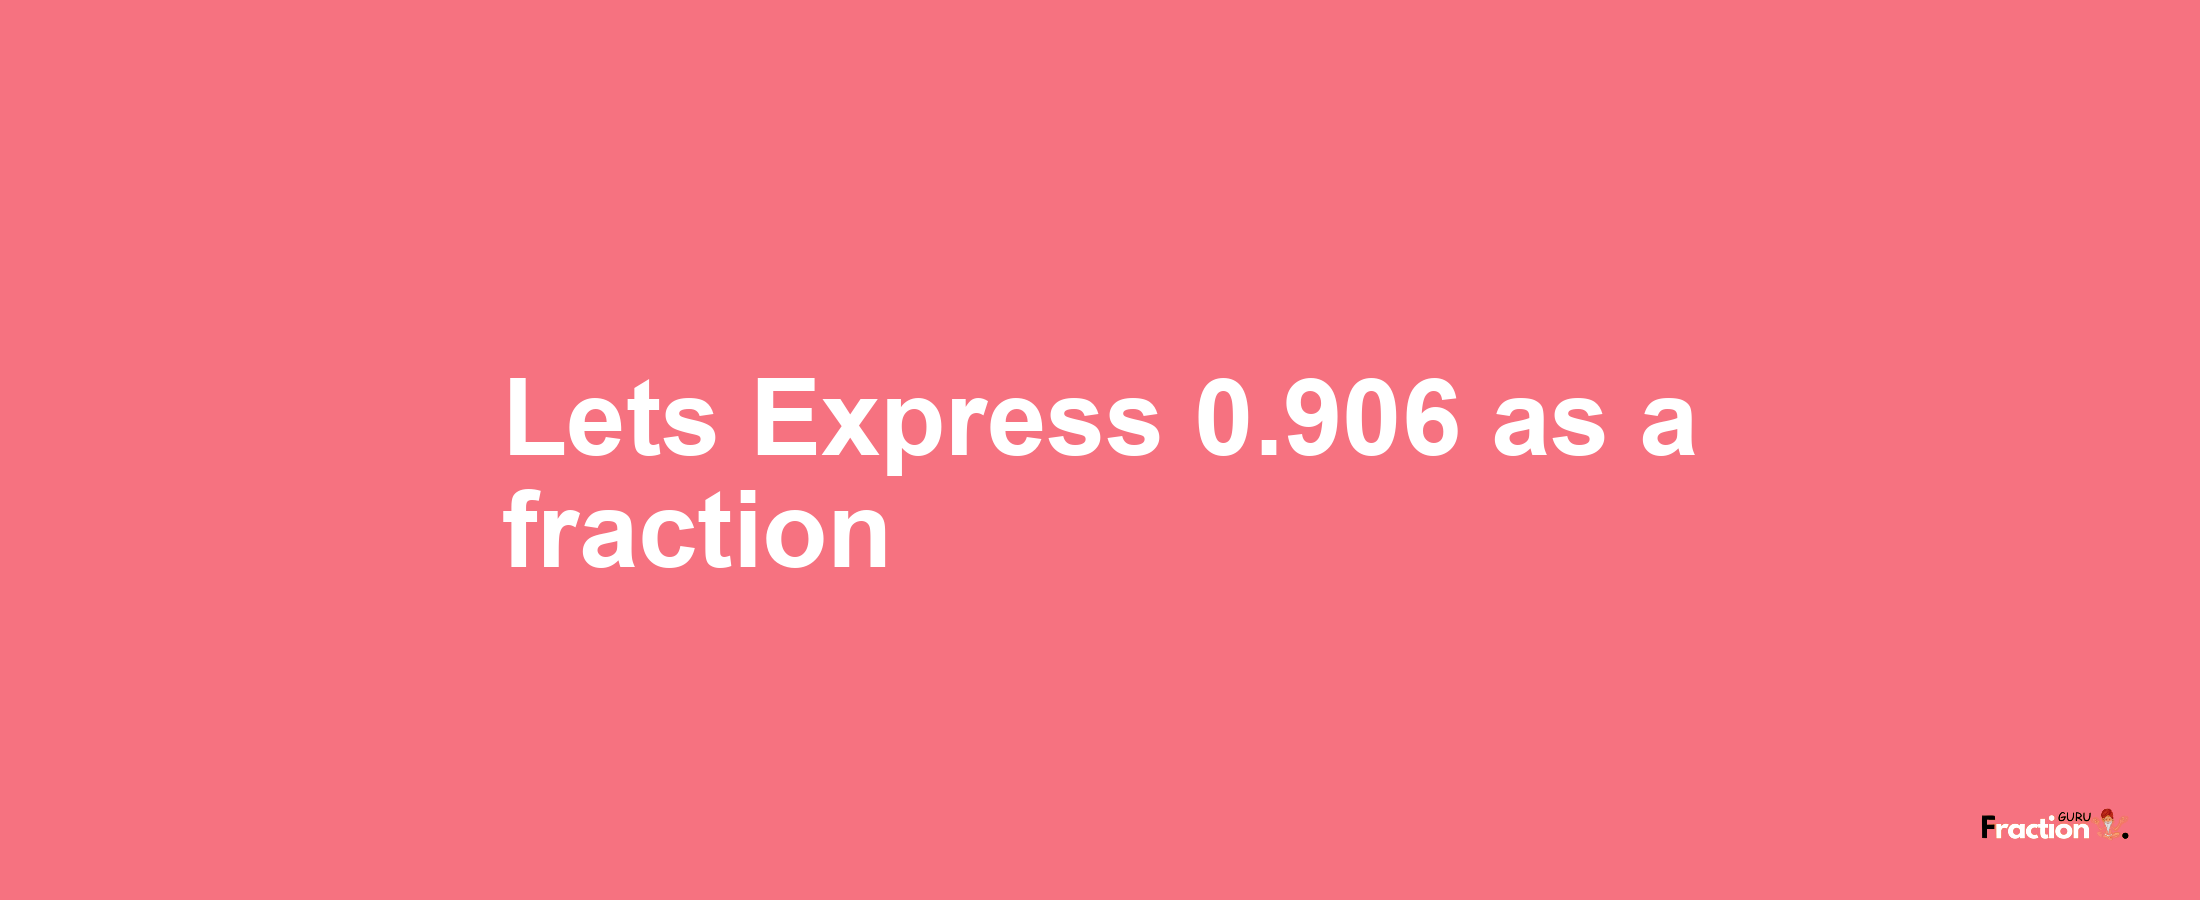 Lets Express 0.906 as afraction